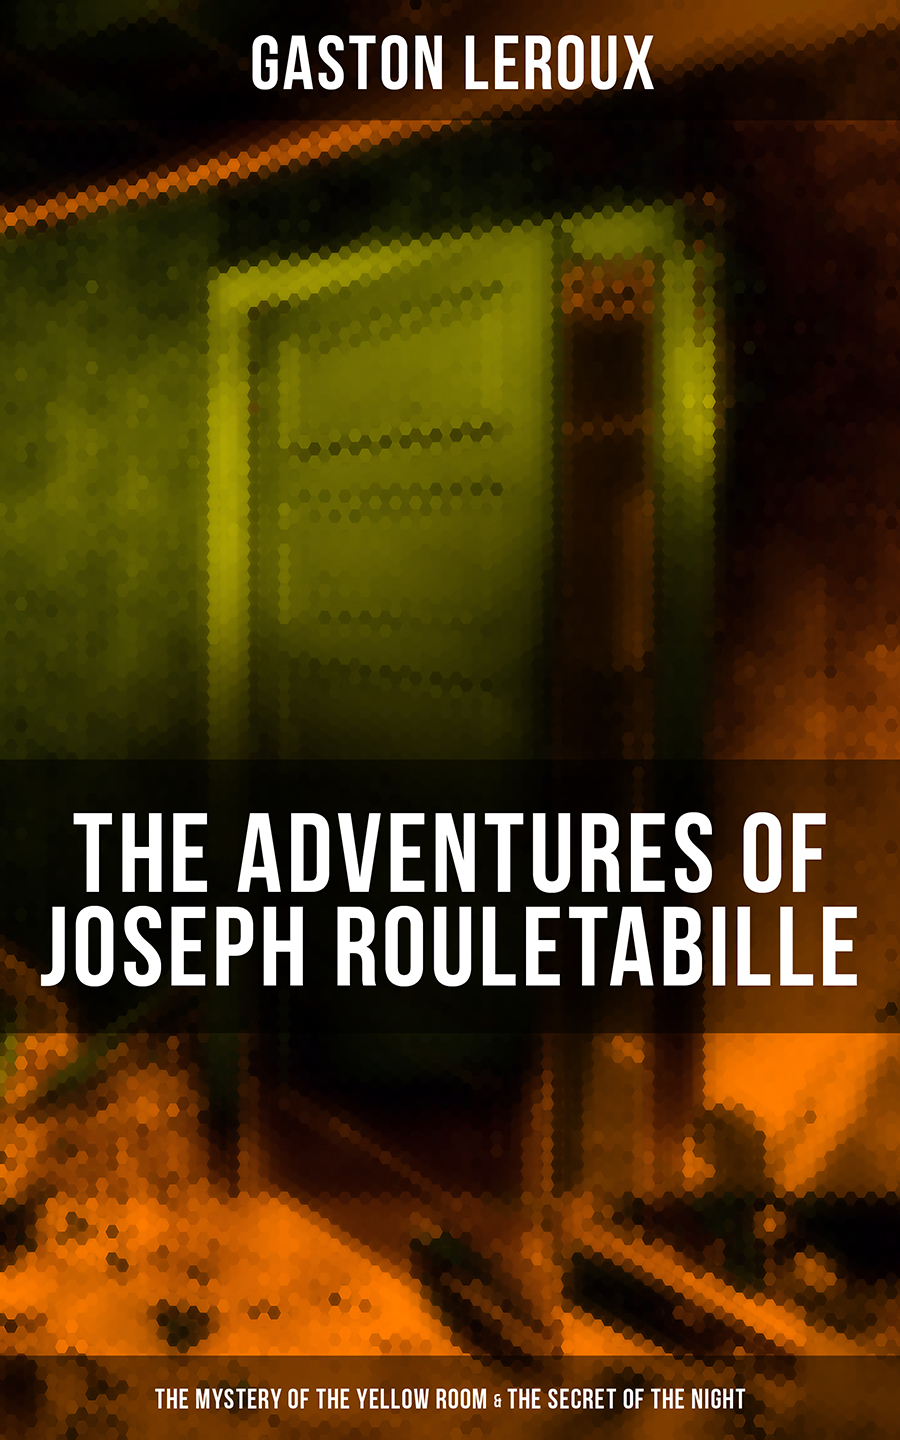 Gaston Leroux THE ADVENTURES OF JOSEPH ROULETABILLE: The Mystery of the Yellow Room & The Secret of the Night